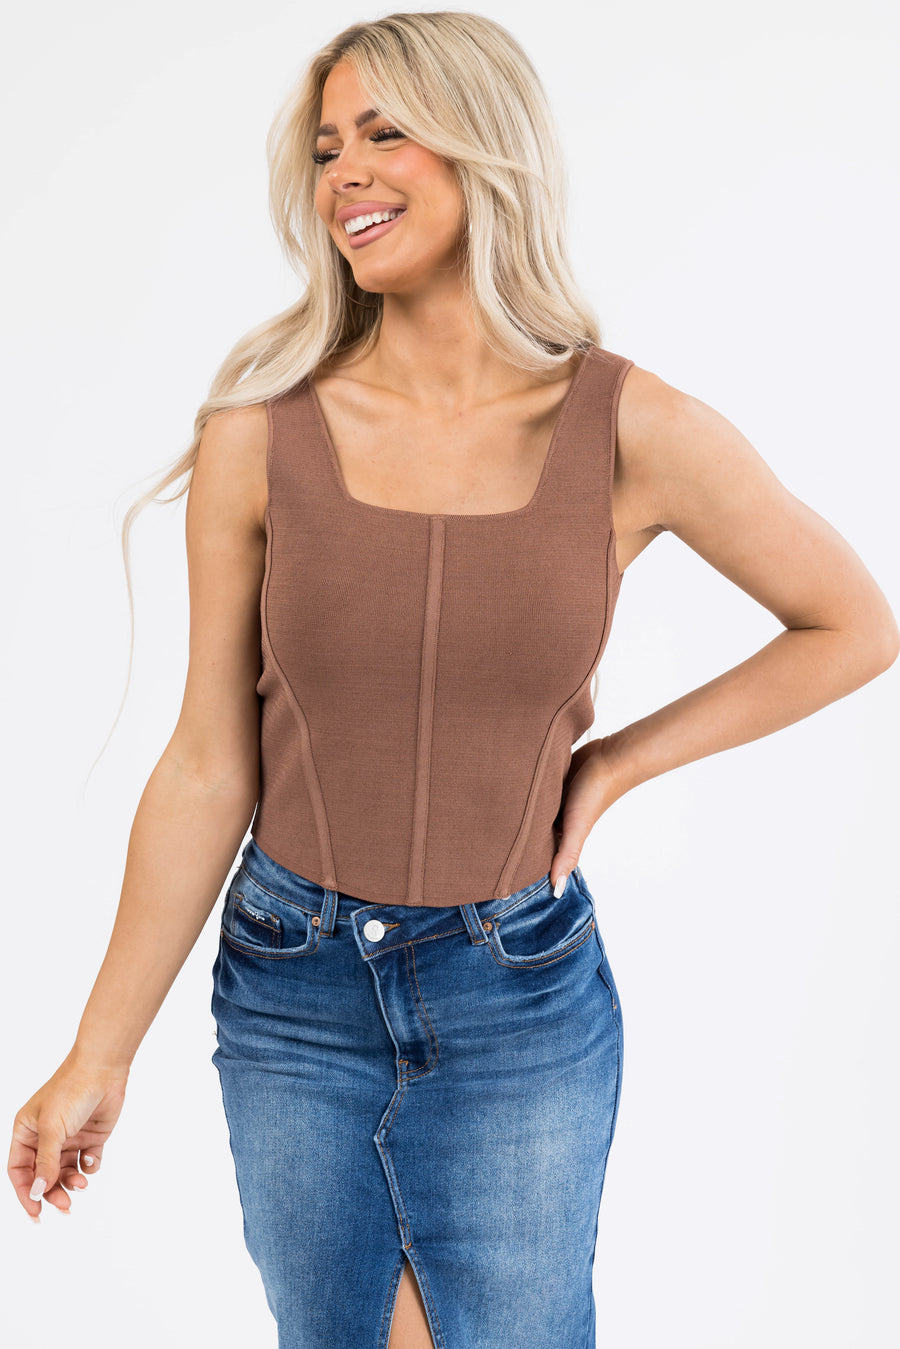 Coffee Square Neck Thick Sleeveless Crop Top